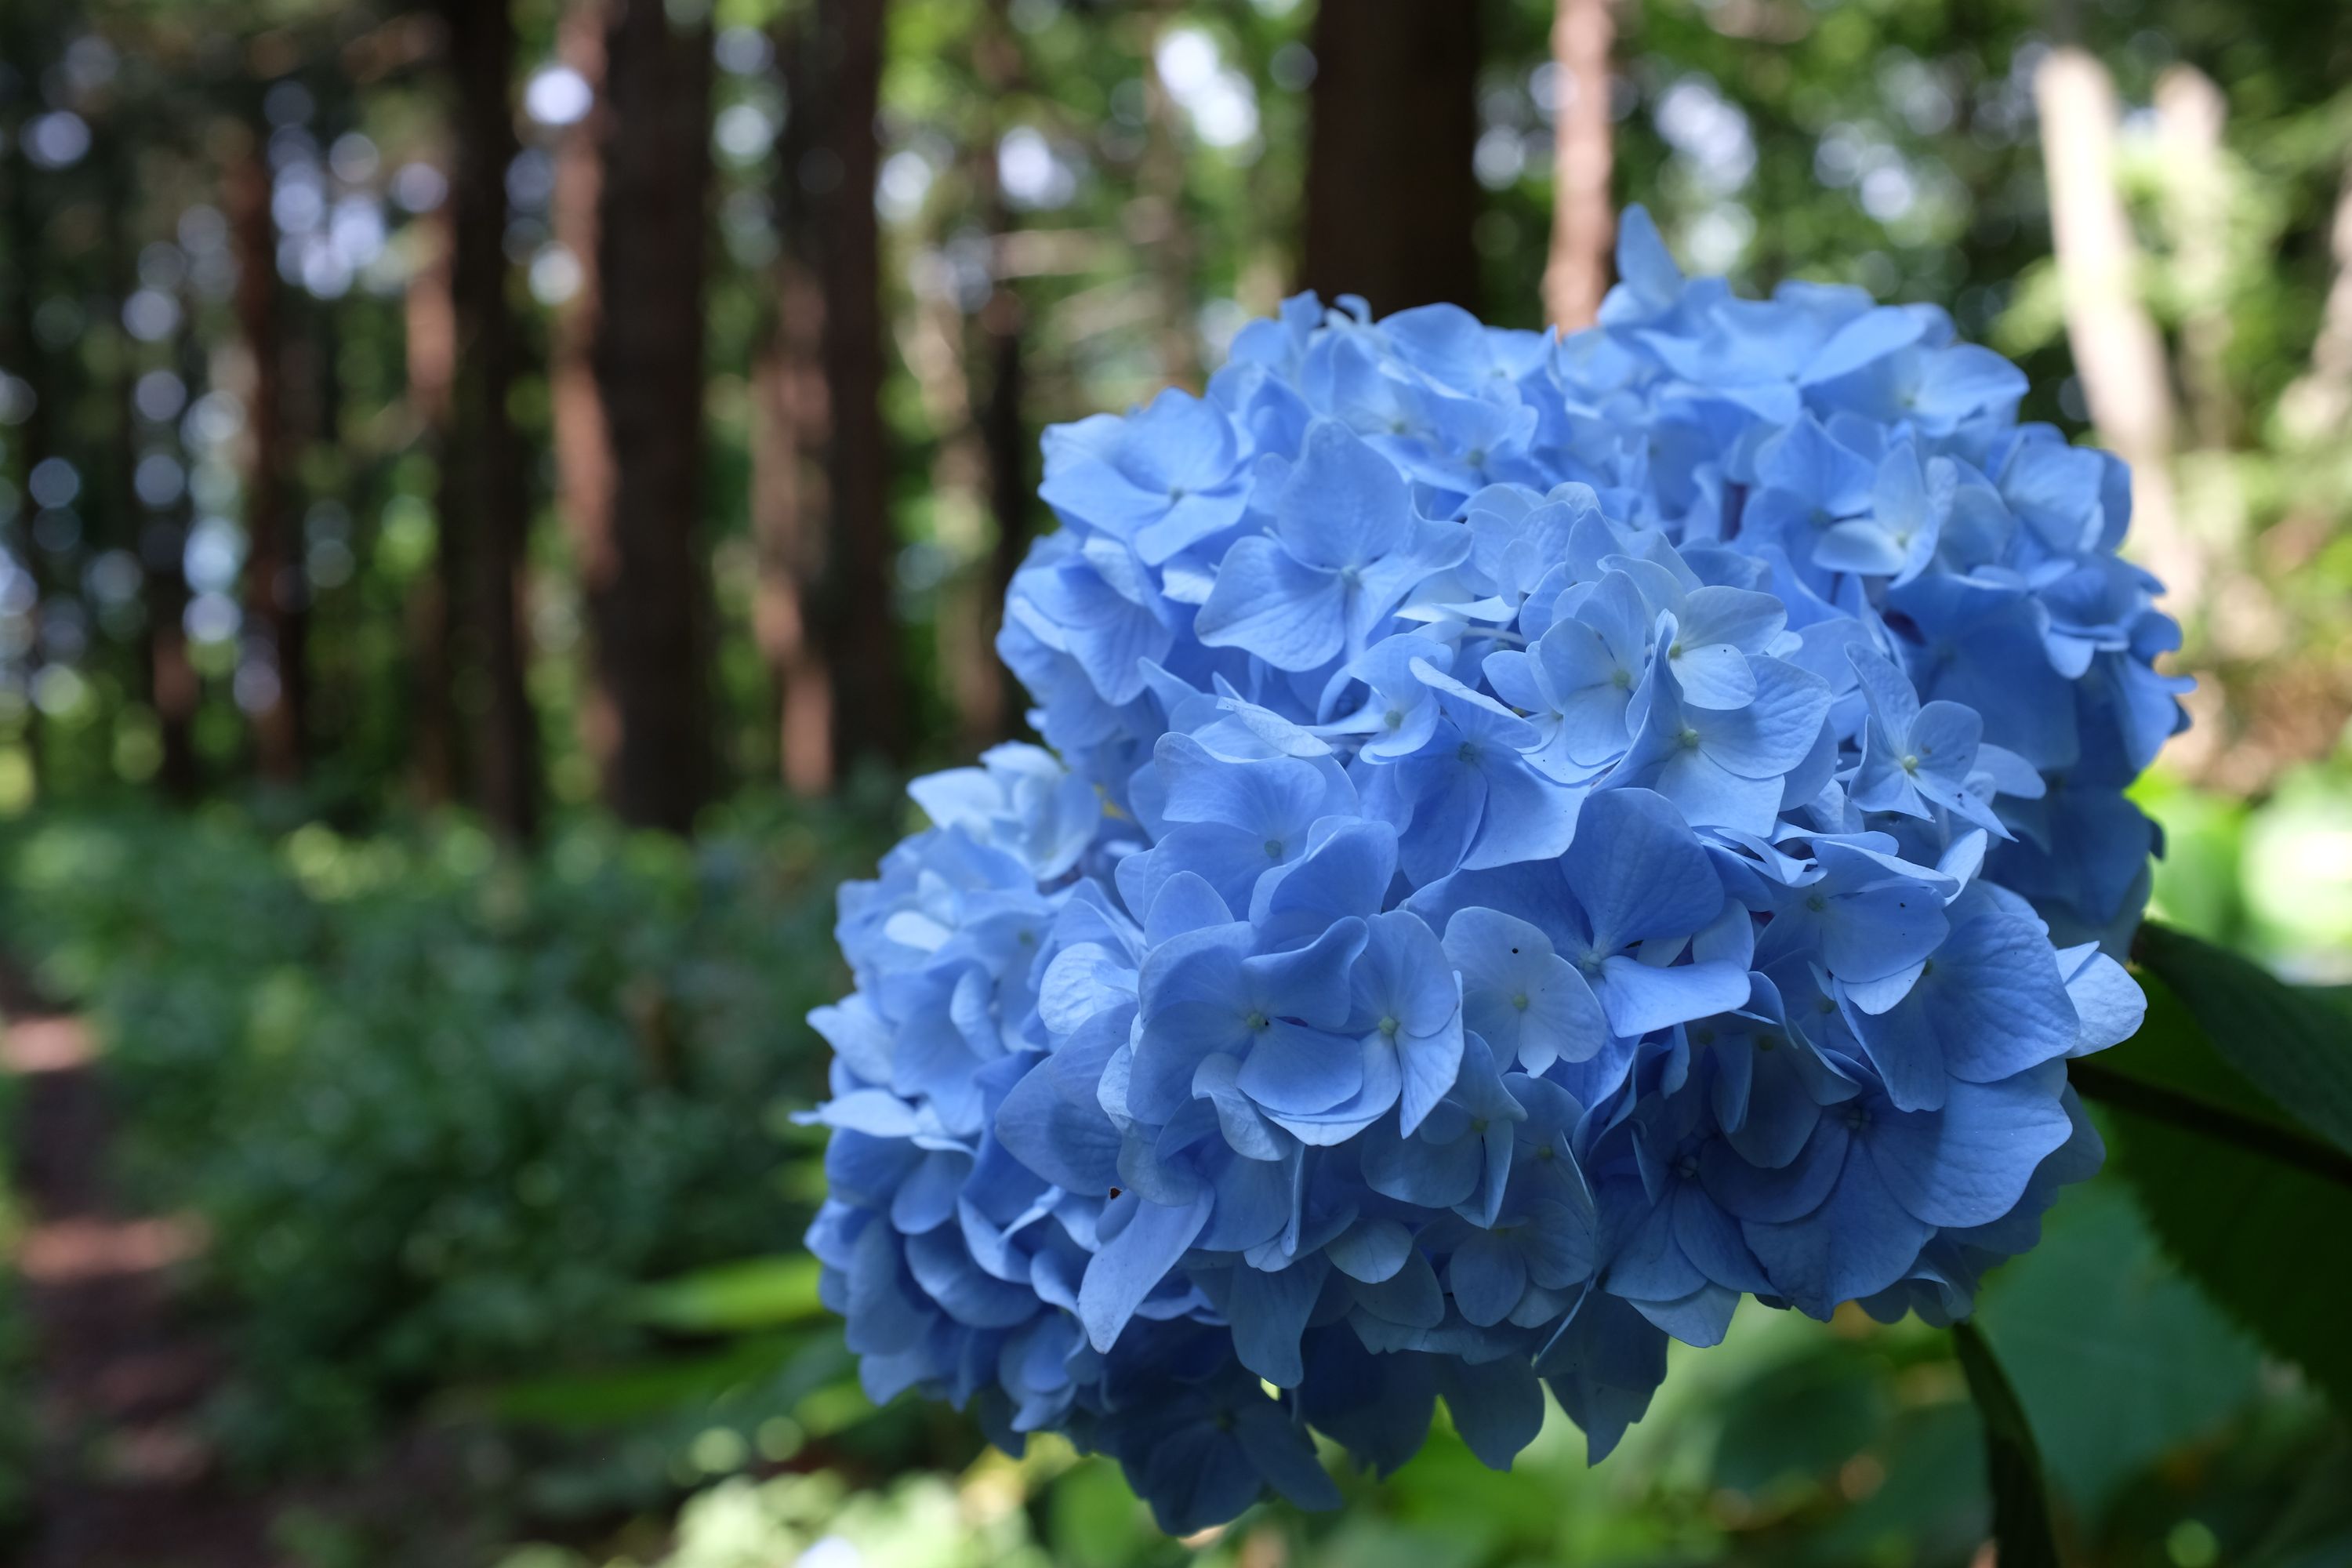 A bright blue head of hydrangea in a forest.